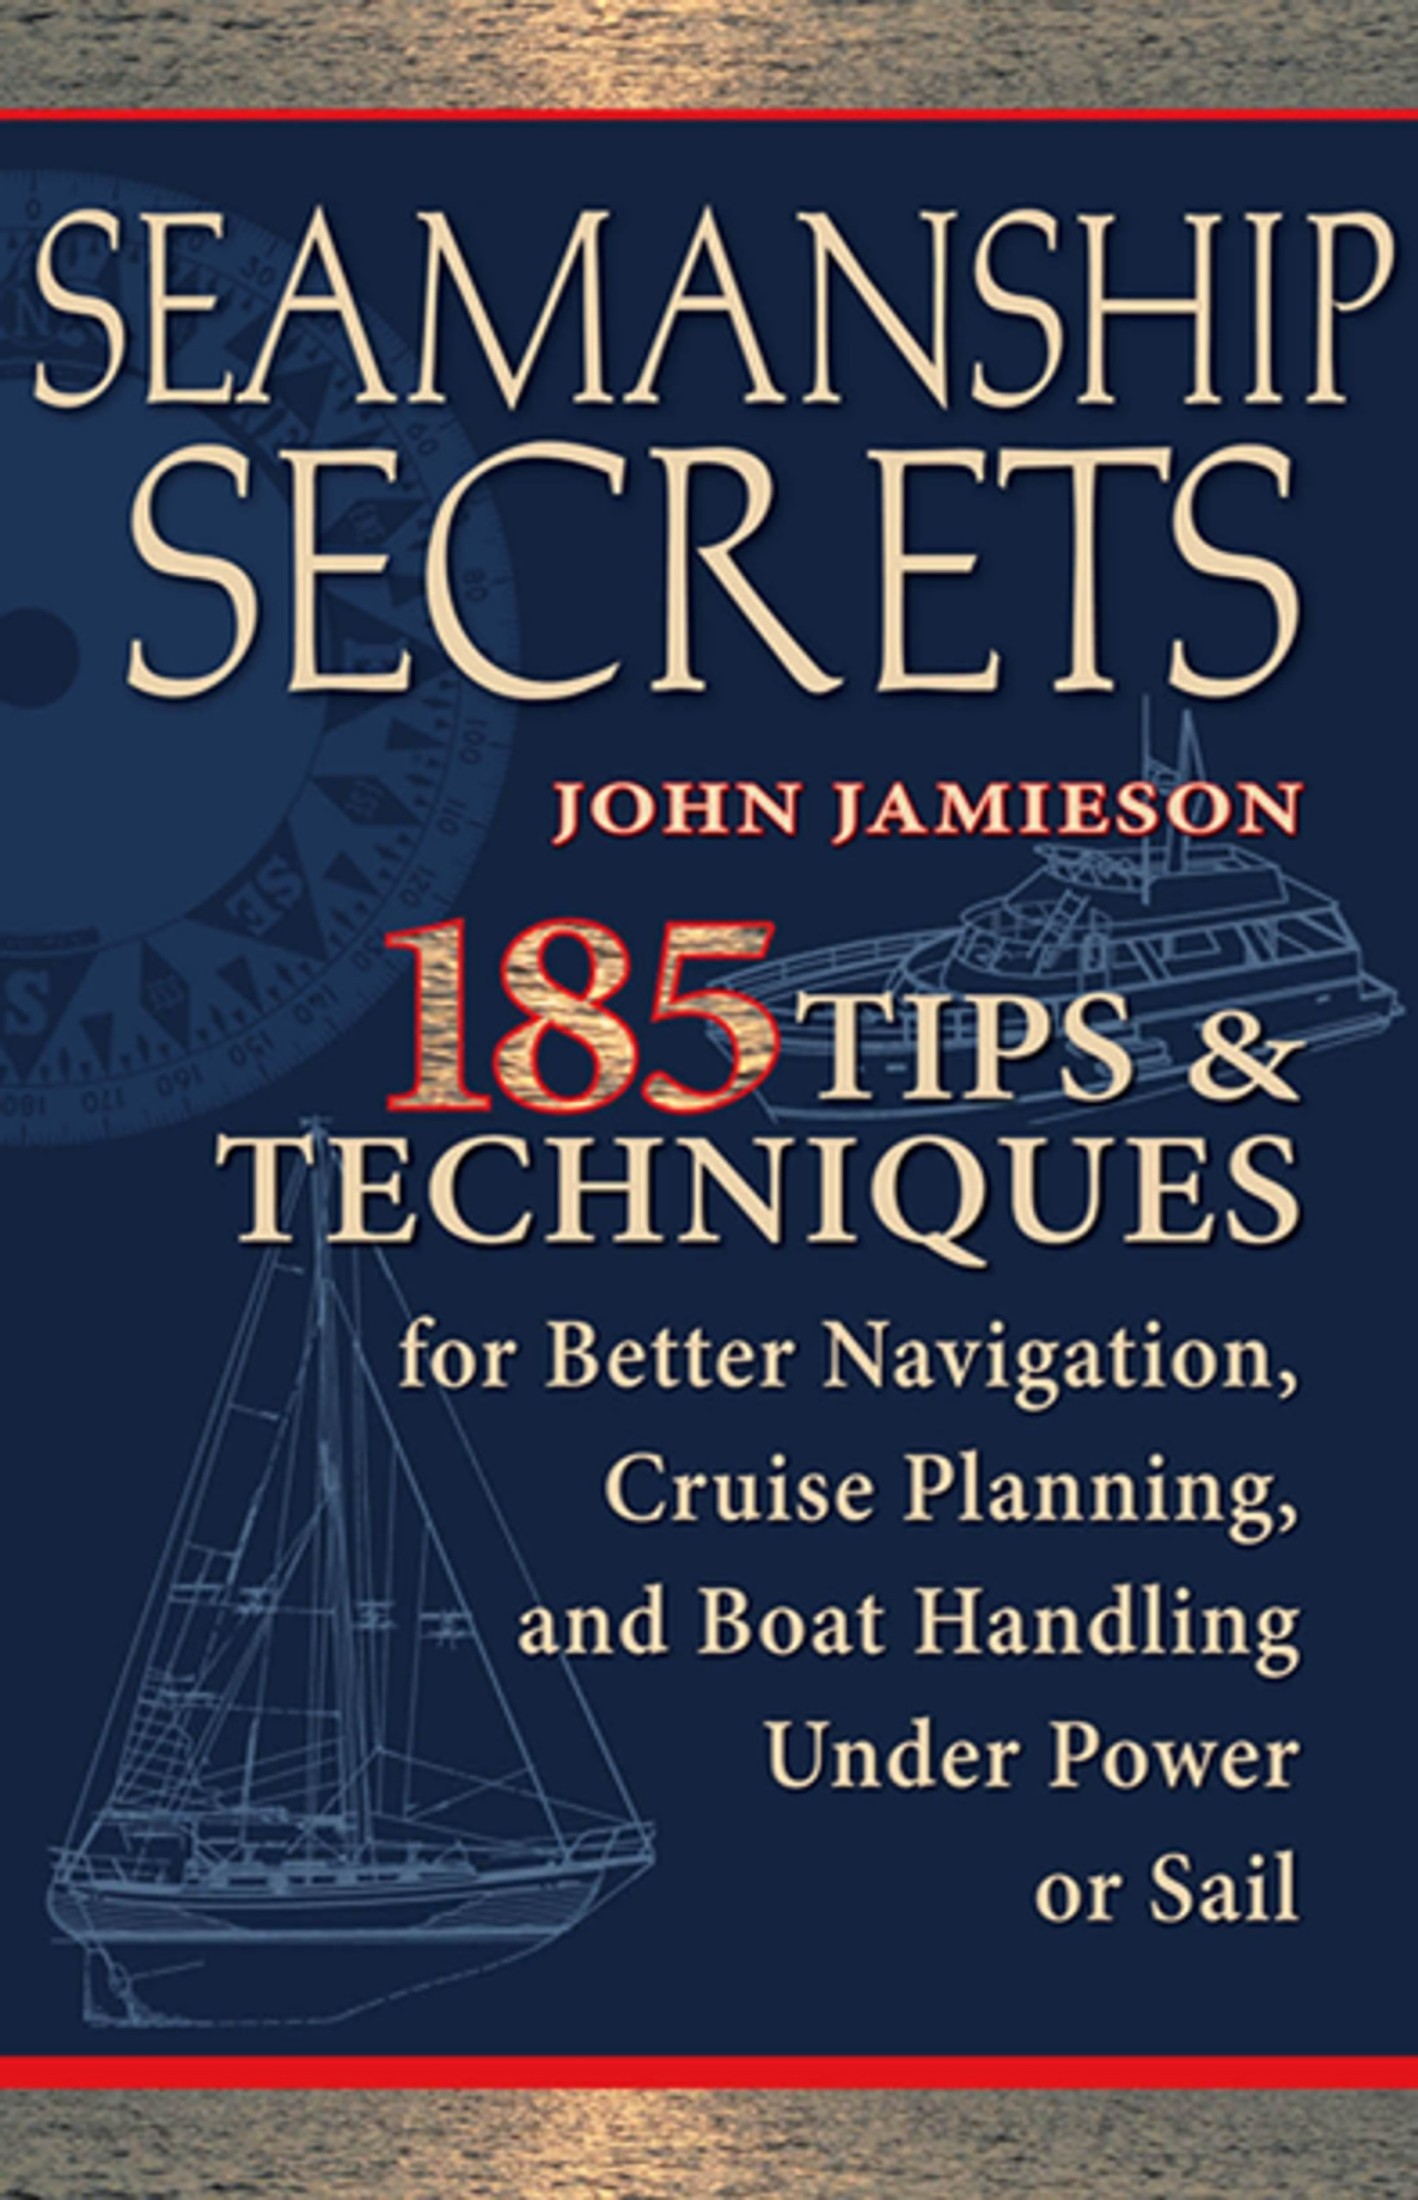 Seamanship Secrets: 185 Tips & Techniques for Better Navigation, Cruise Planning, and Boat Handling Under Power or Sail